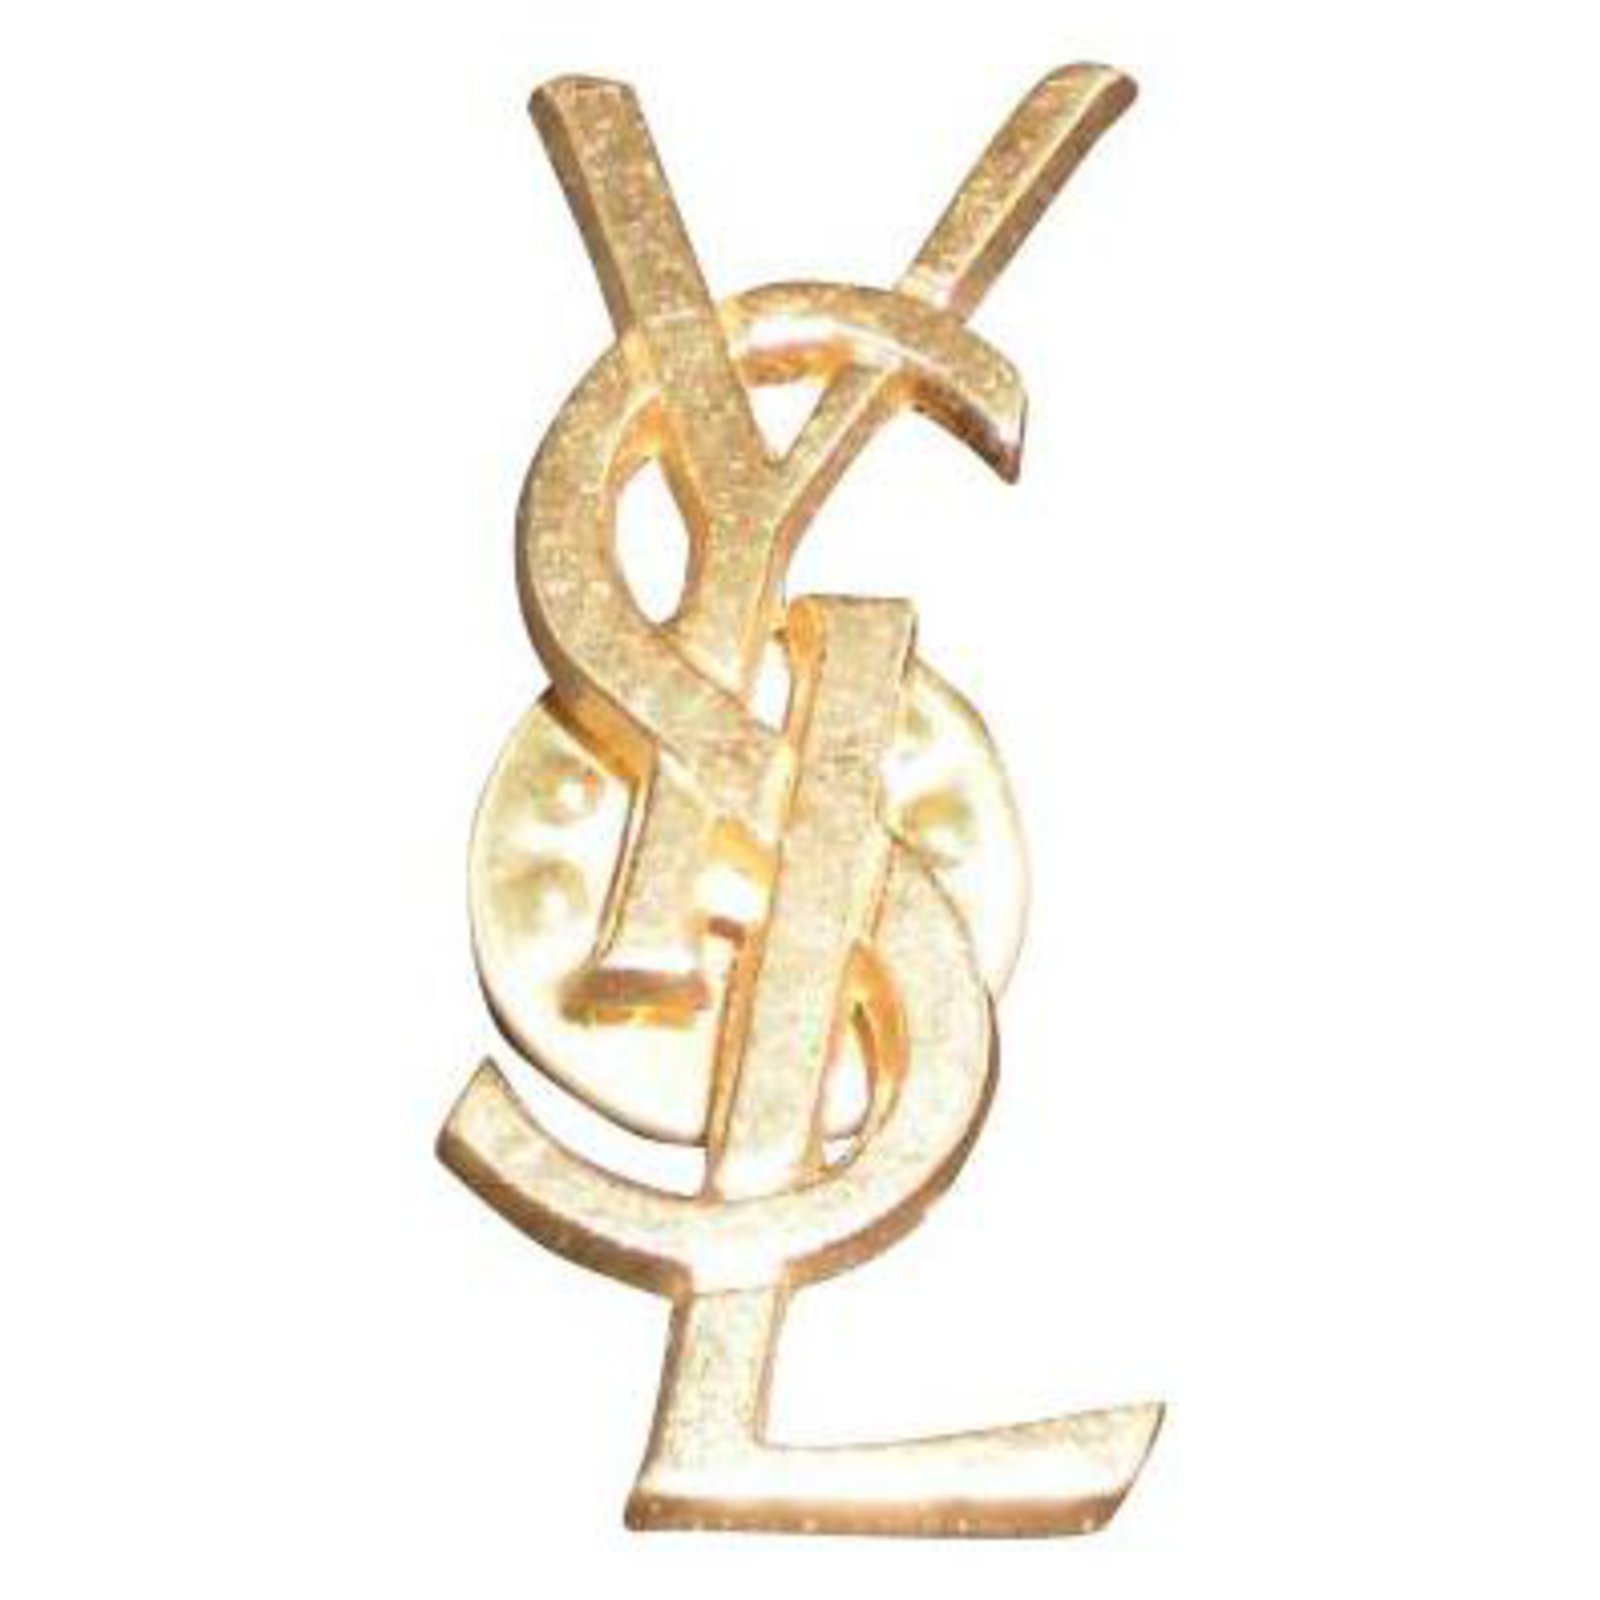 SOLD OUT】YSL Yves Saint Laurent Vintage Gold Tone Logo Brooch Pin